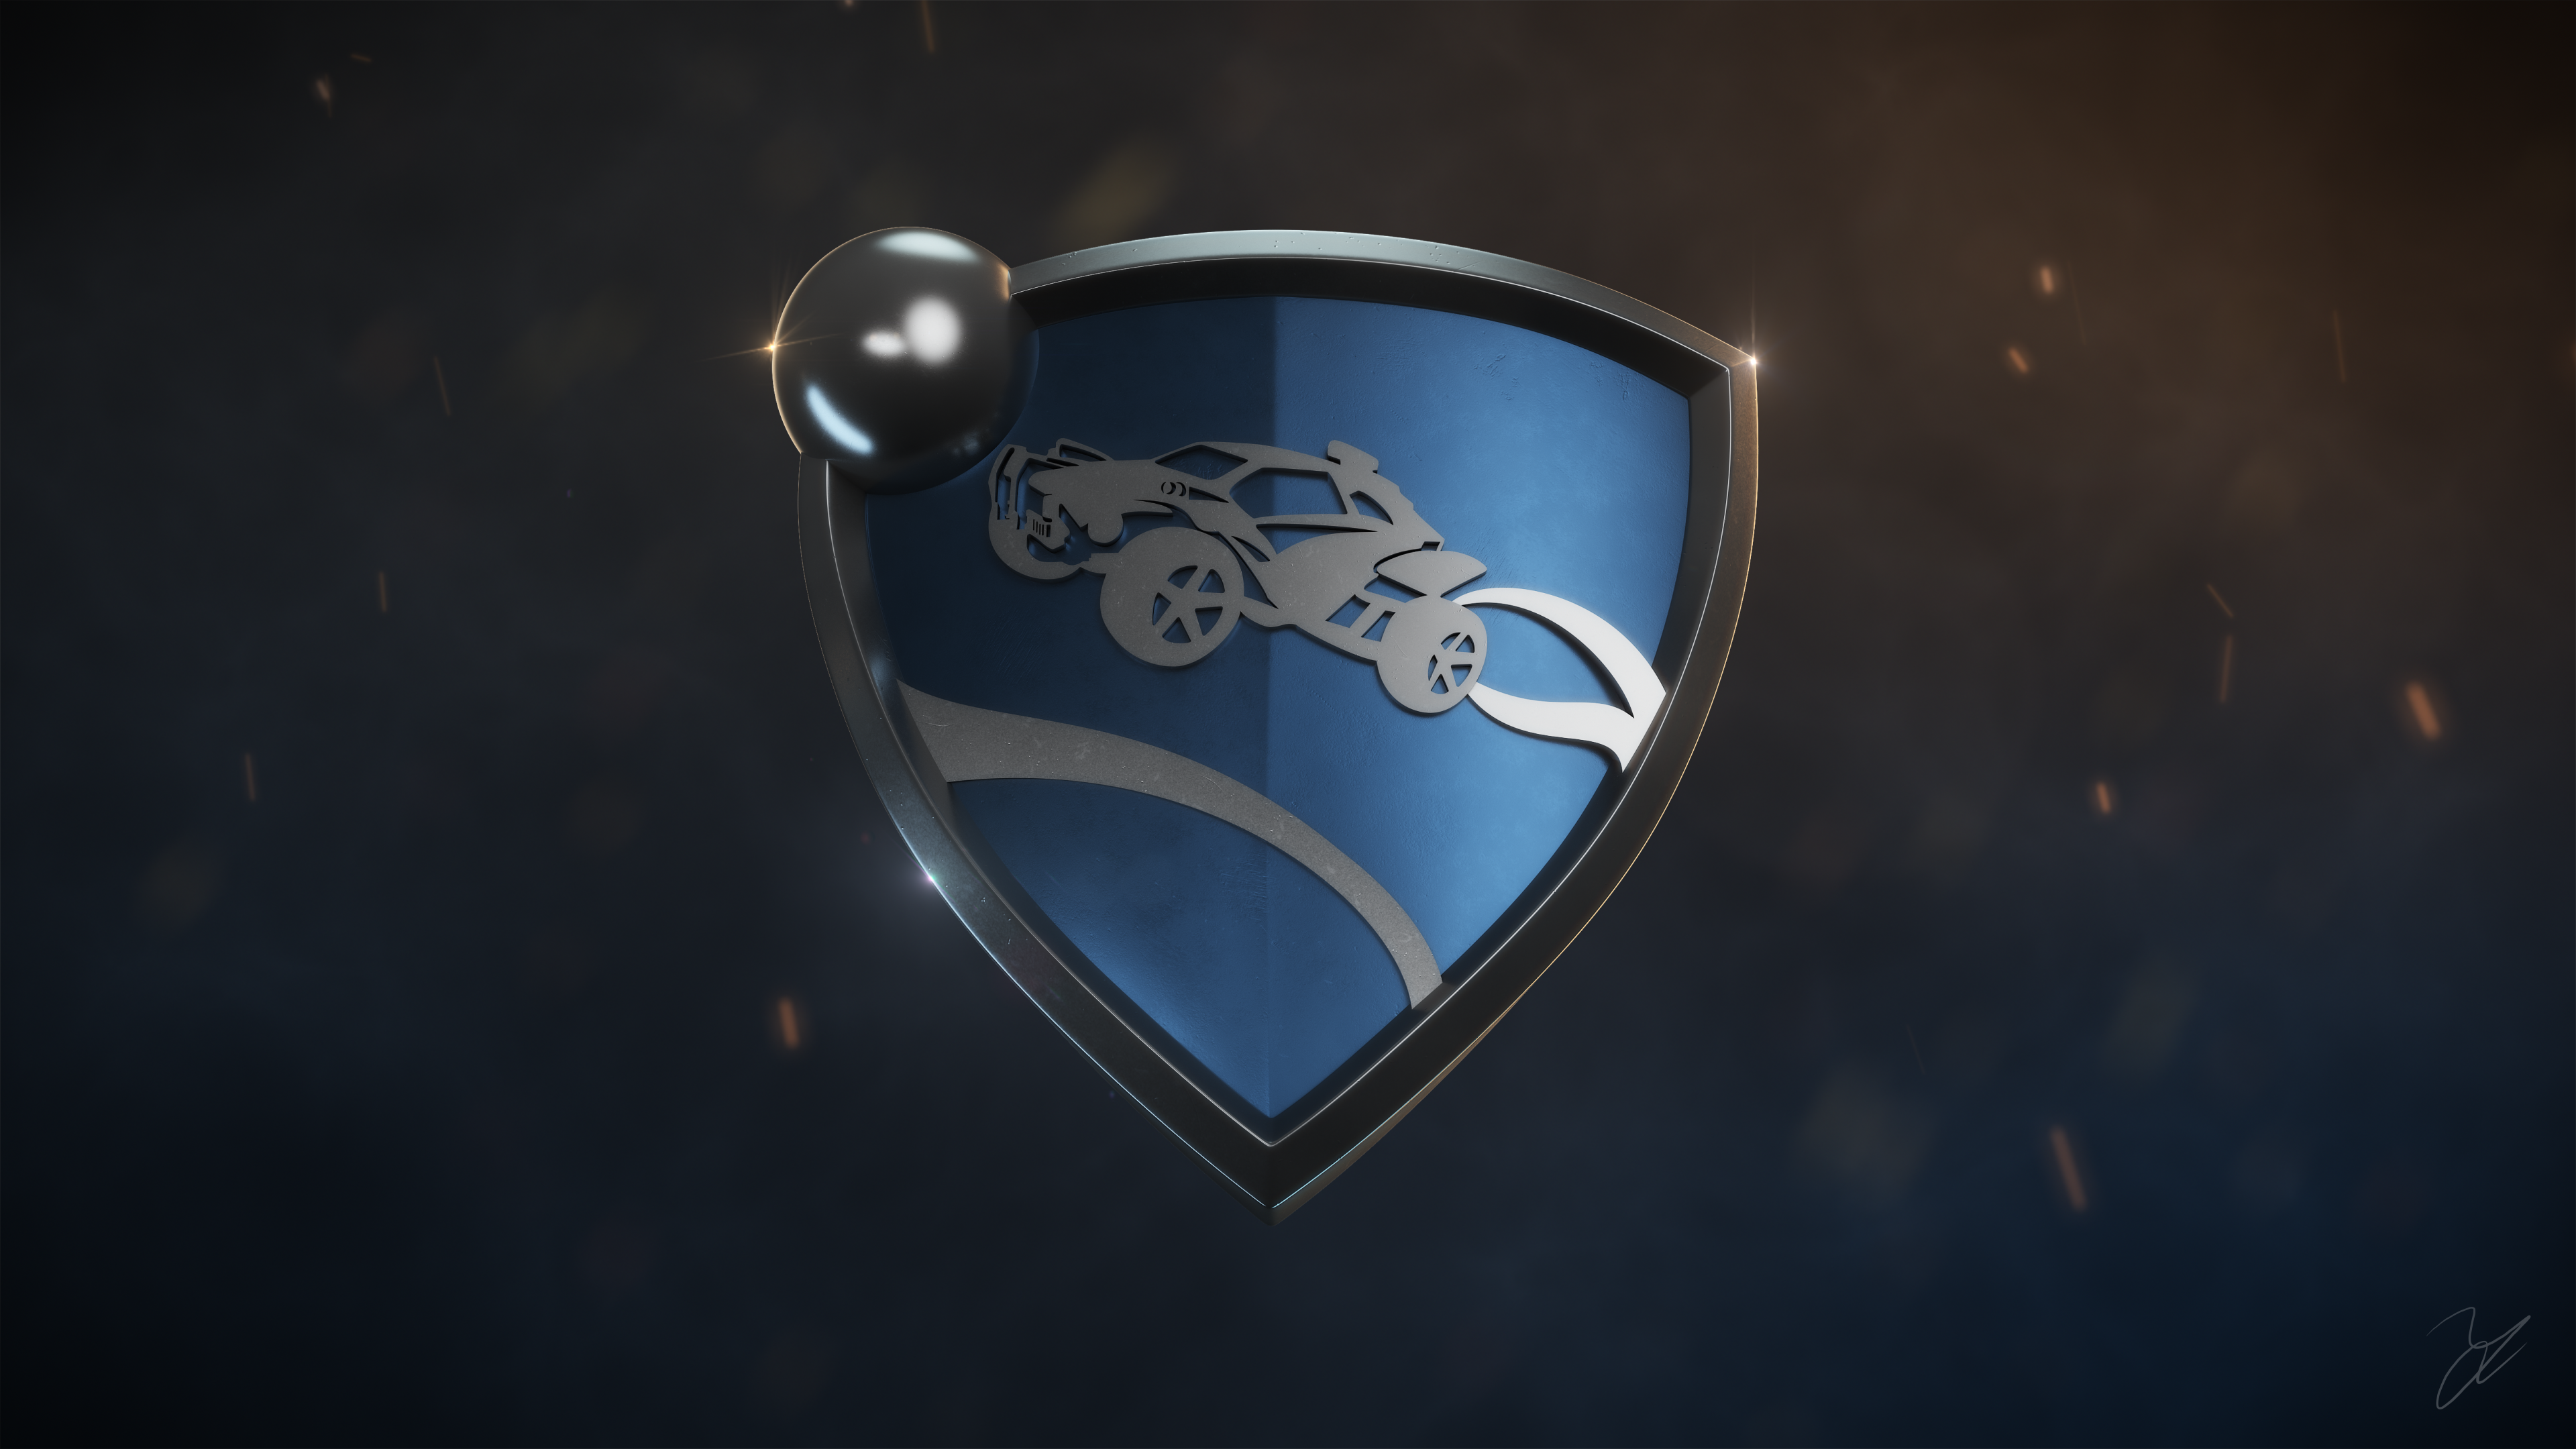 I made a 3D Rocket League emblem for you guys. Enjoy it in 4K glory!